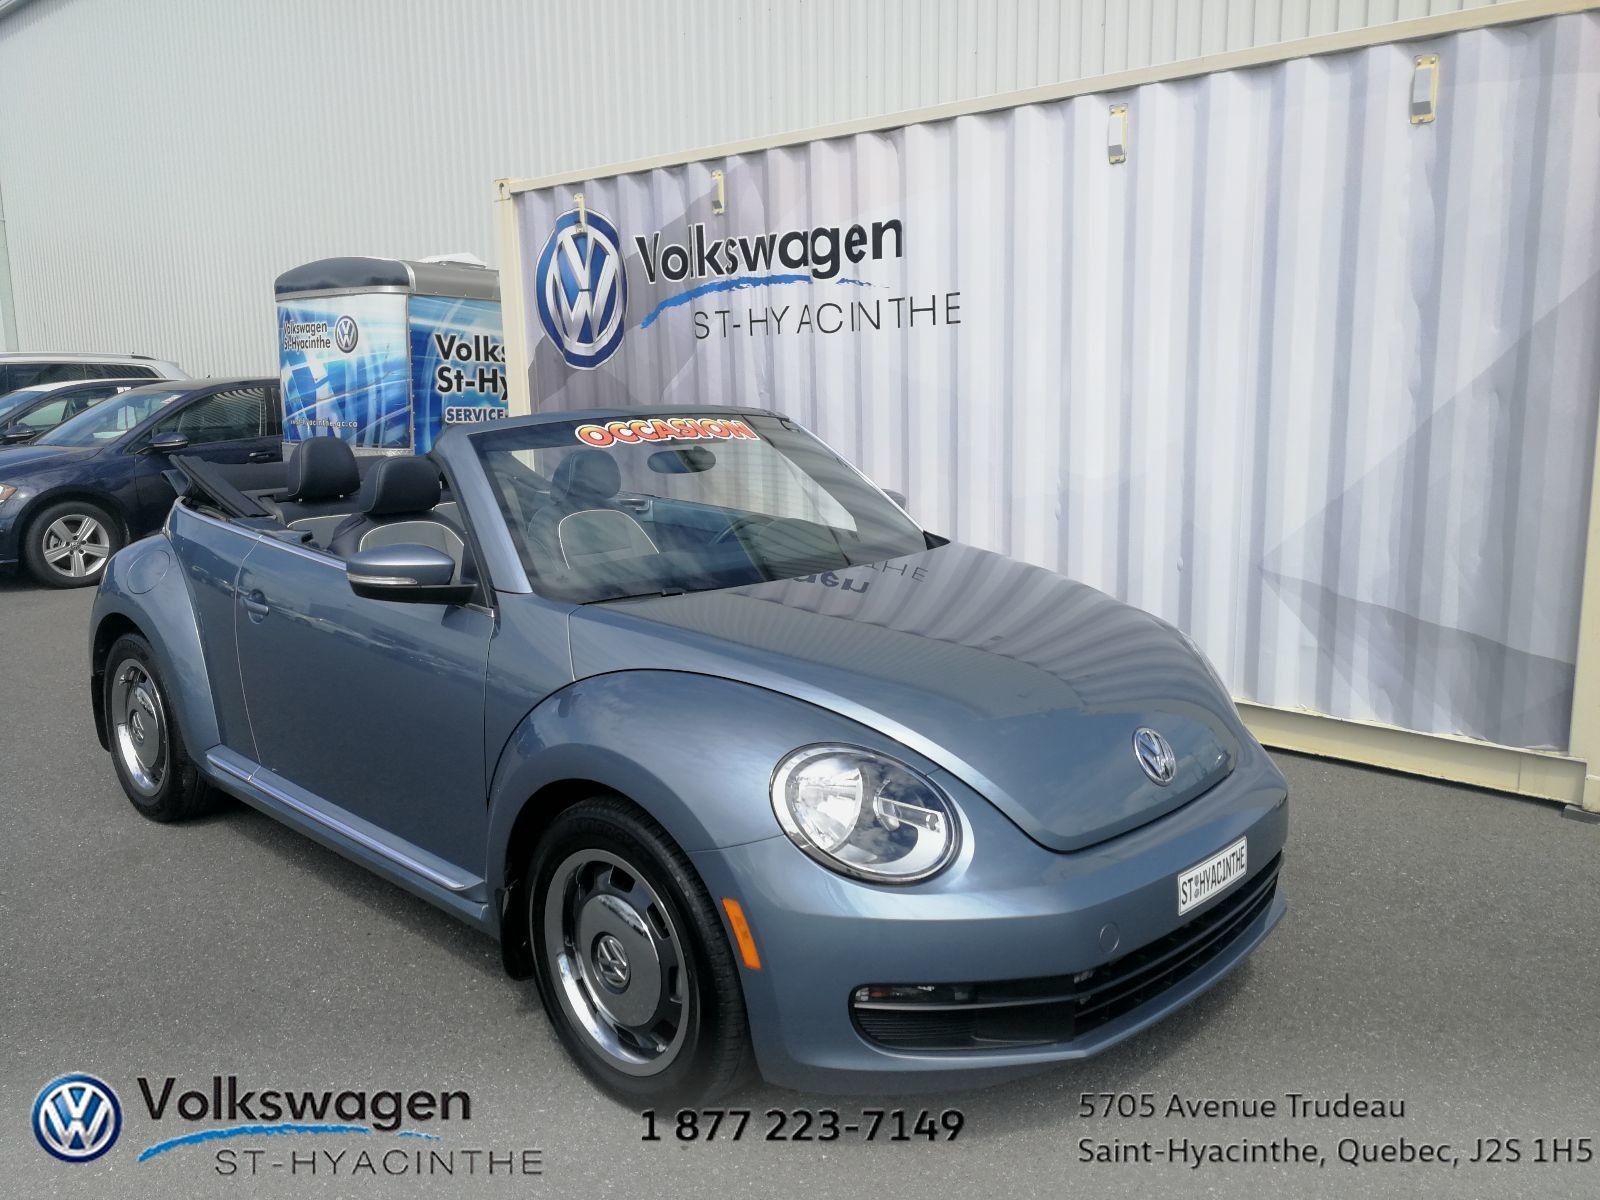 Used 16 Volkswagen Beetle Convertible Edition Denim Bas Km Rare Blue 9 936 Km For Sale 294 0 Volkswagen St Hyacinthe 9c218a